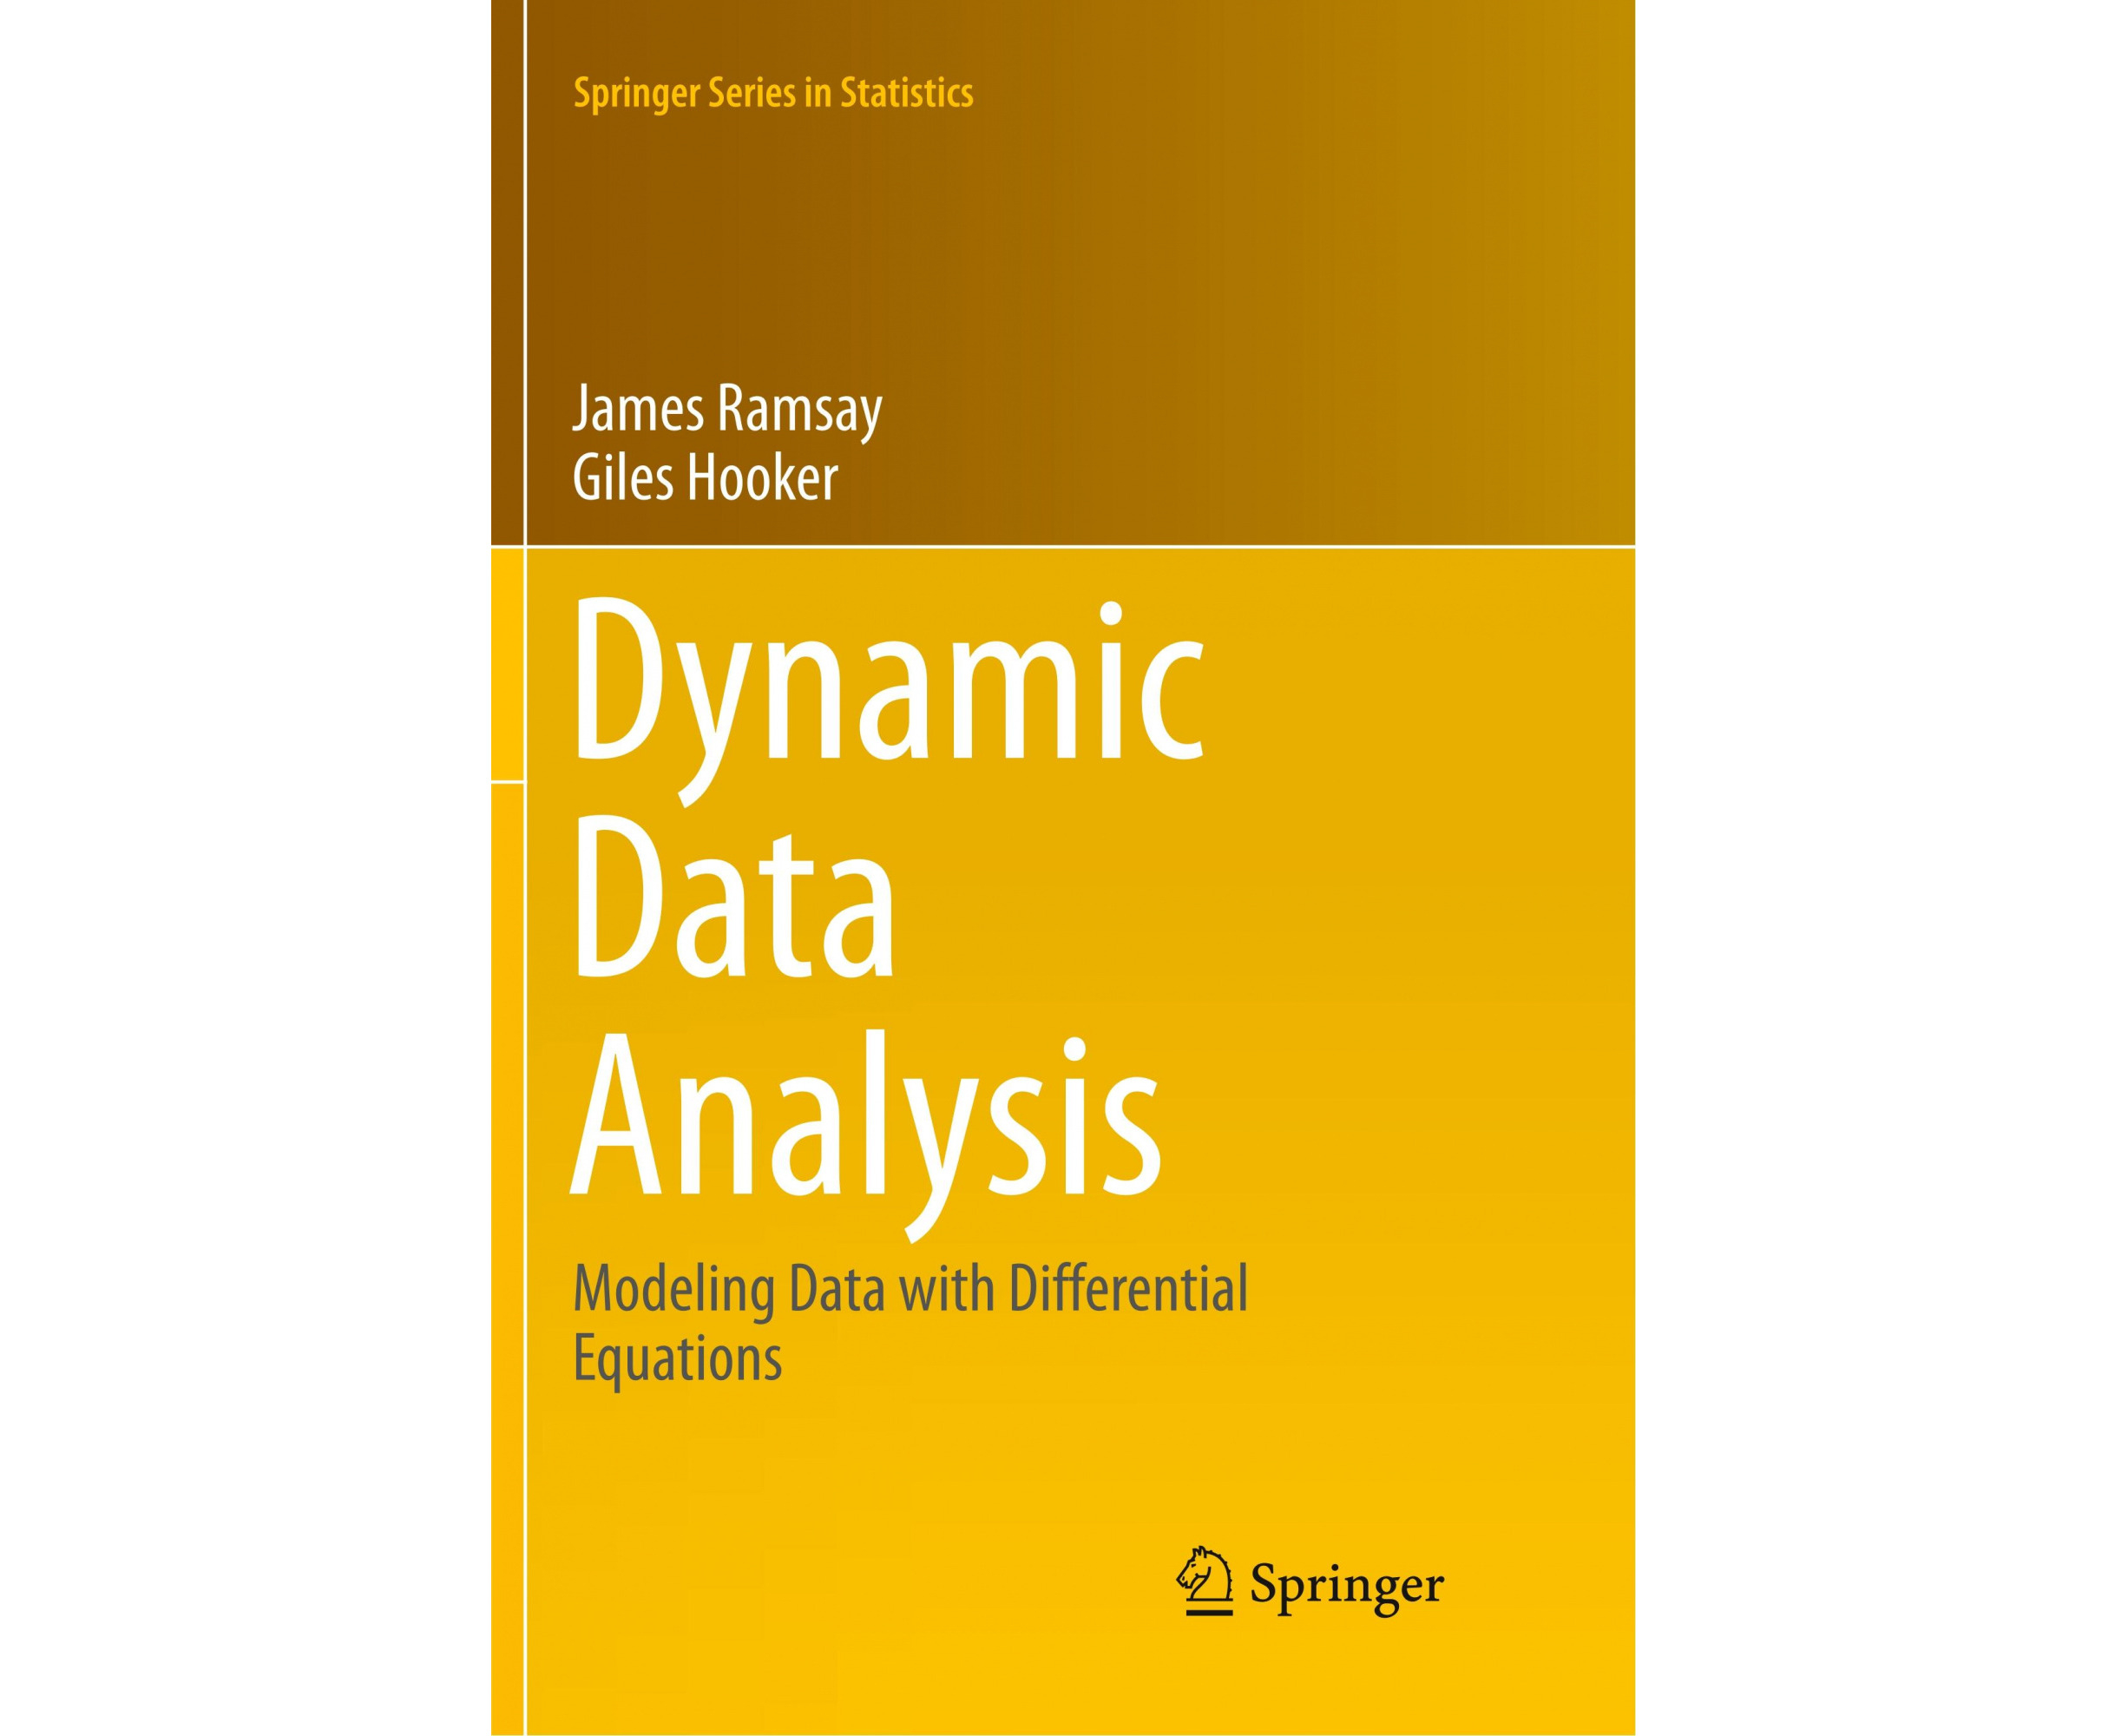 in　Equations　Series　Data　(Springer　Modeling　Differential　with　Data　Analysis:　Dynamic　Statistics)